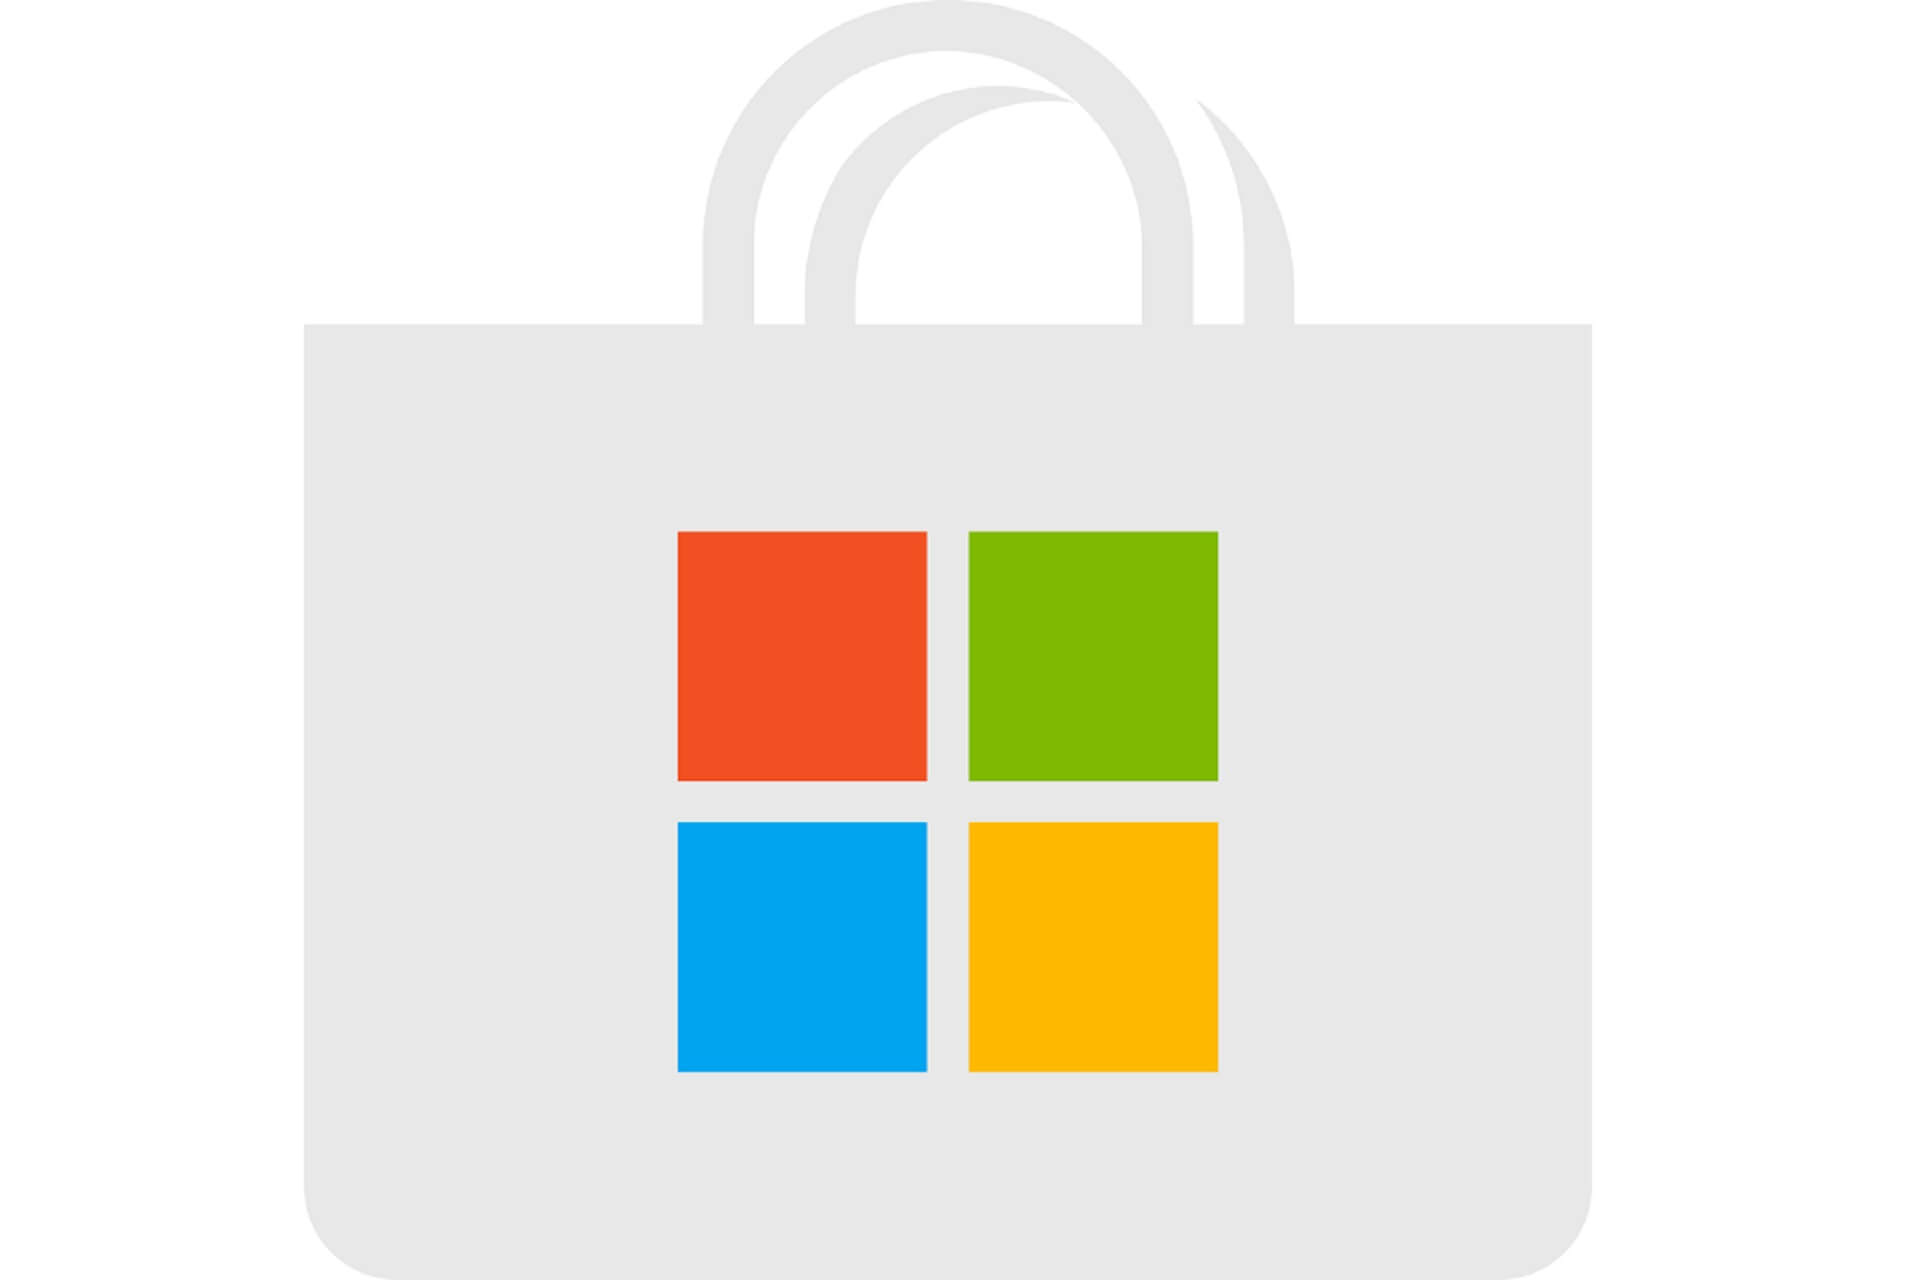 microsoft store doesn't launch